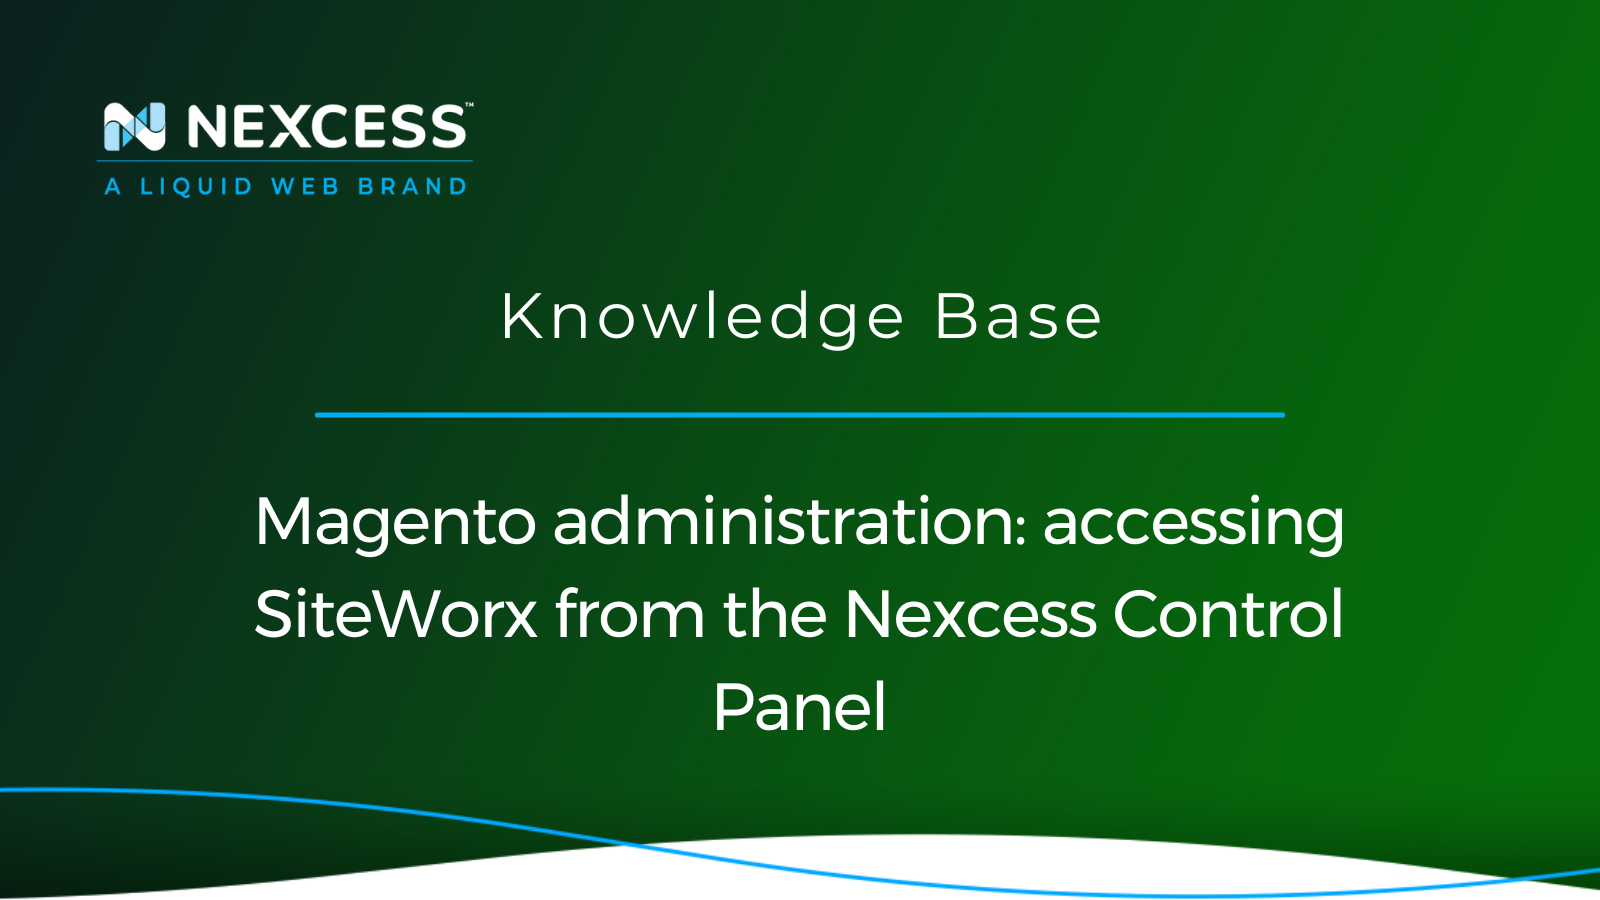 Magento administration: accessing SiteWorx from the Nexcess Control Panel